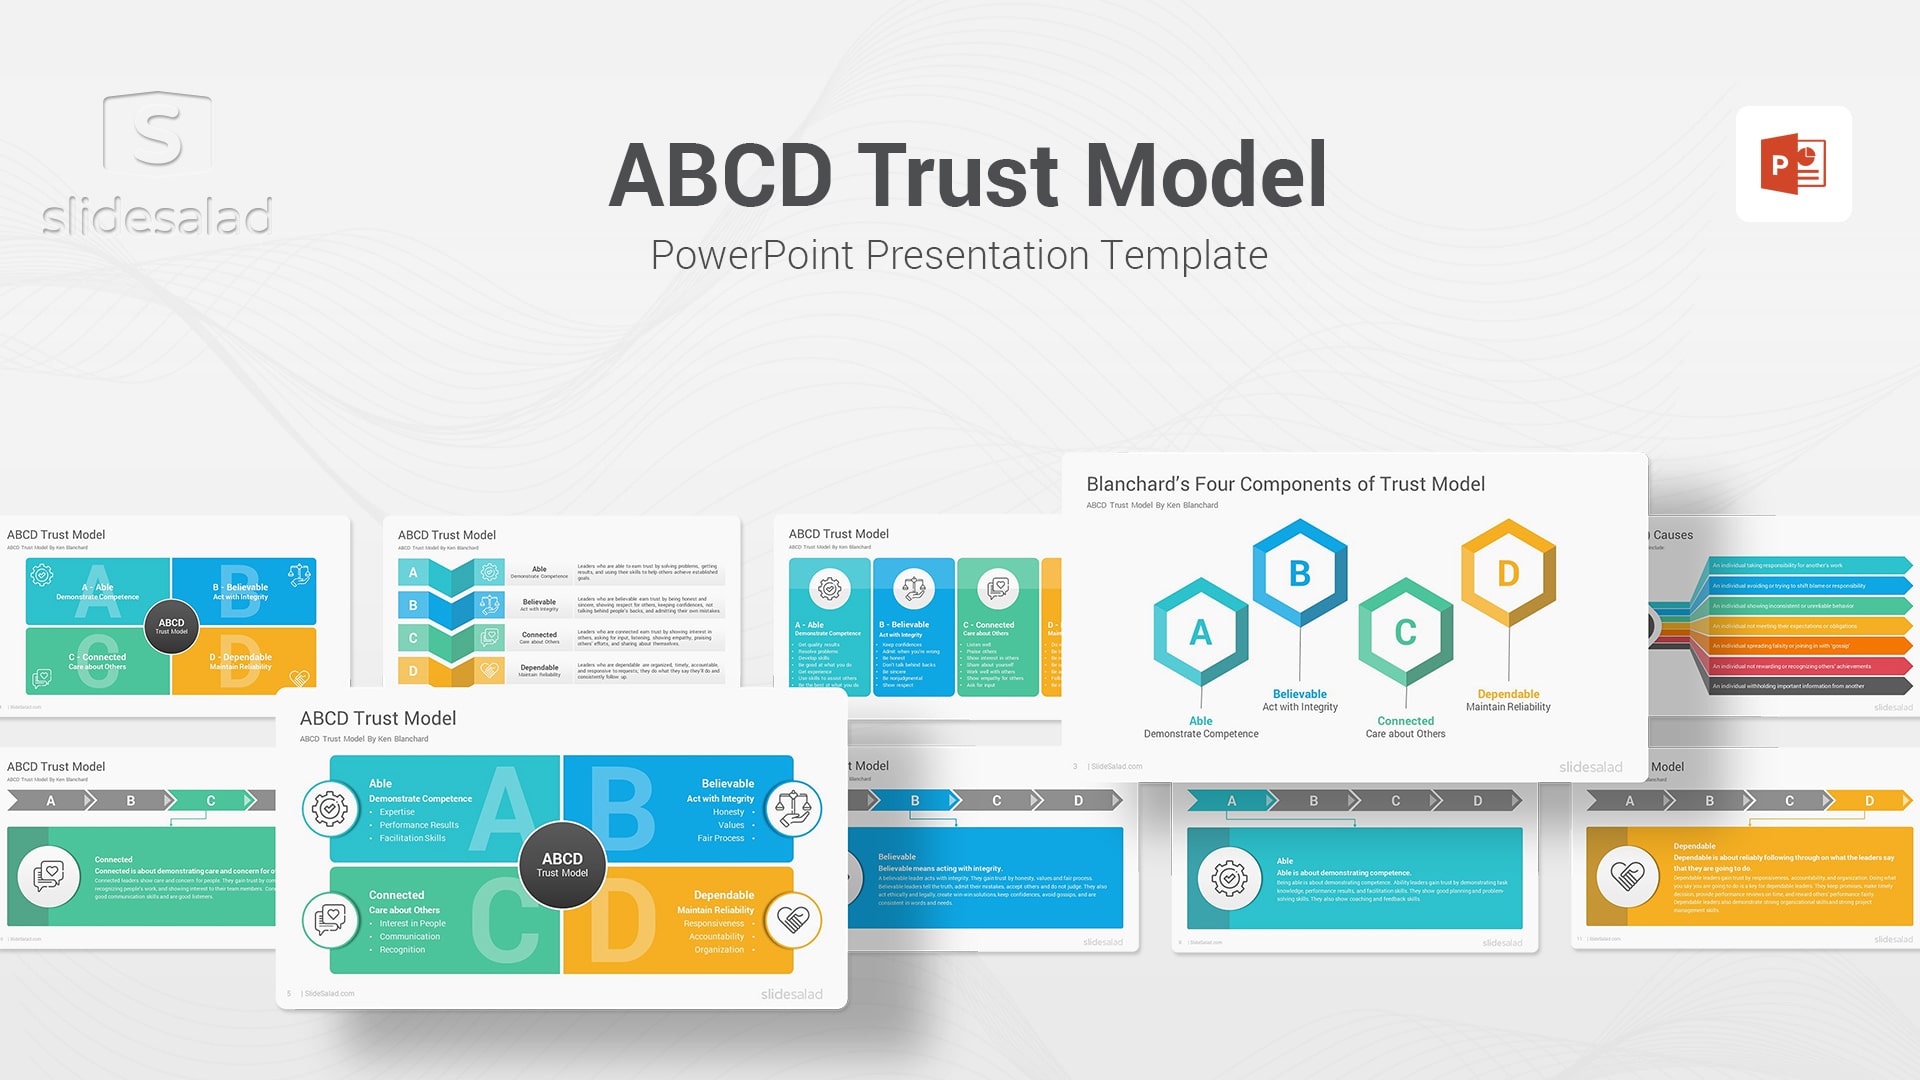 ABCD Trust Model PowerPoint Template - Leadership Development PPT Themes and Designs